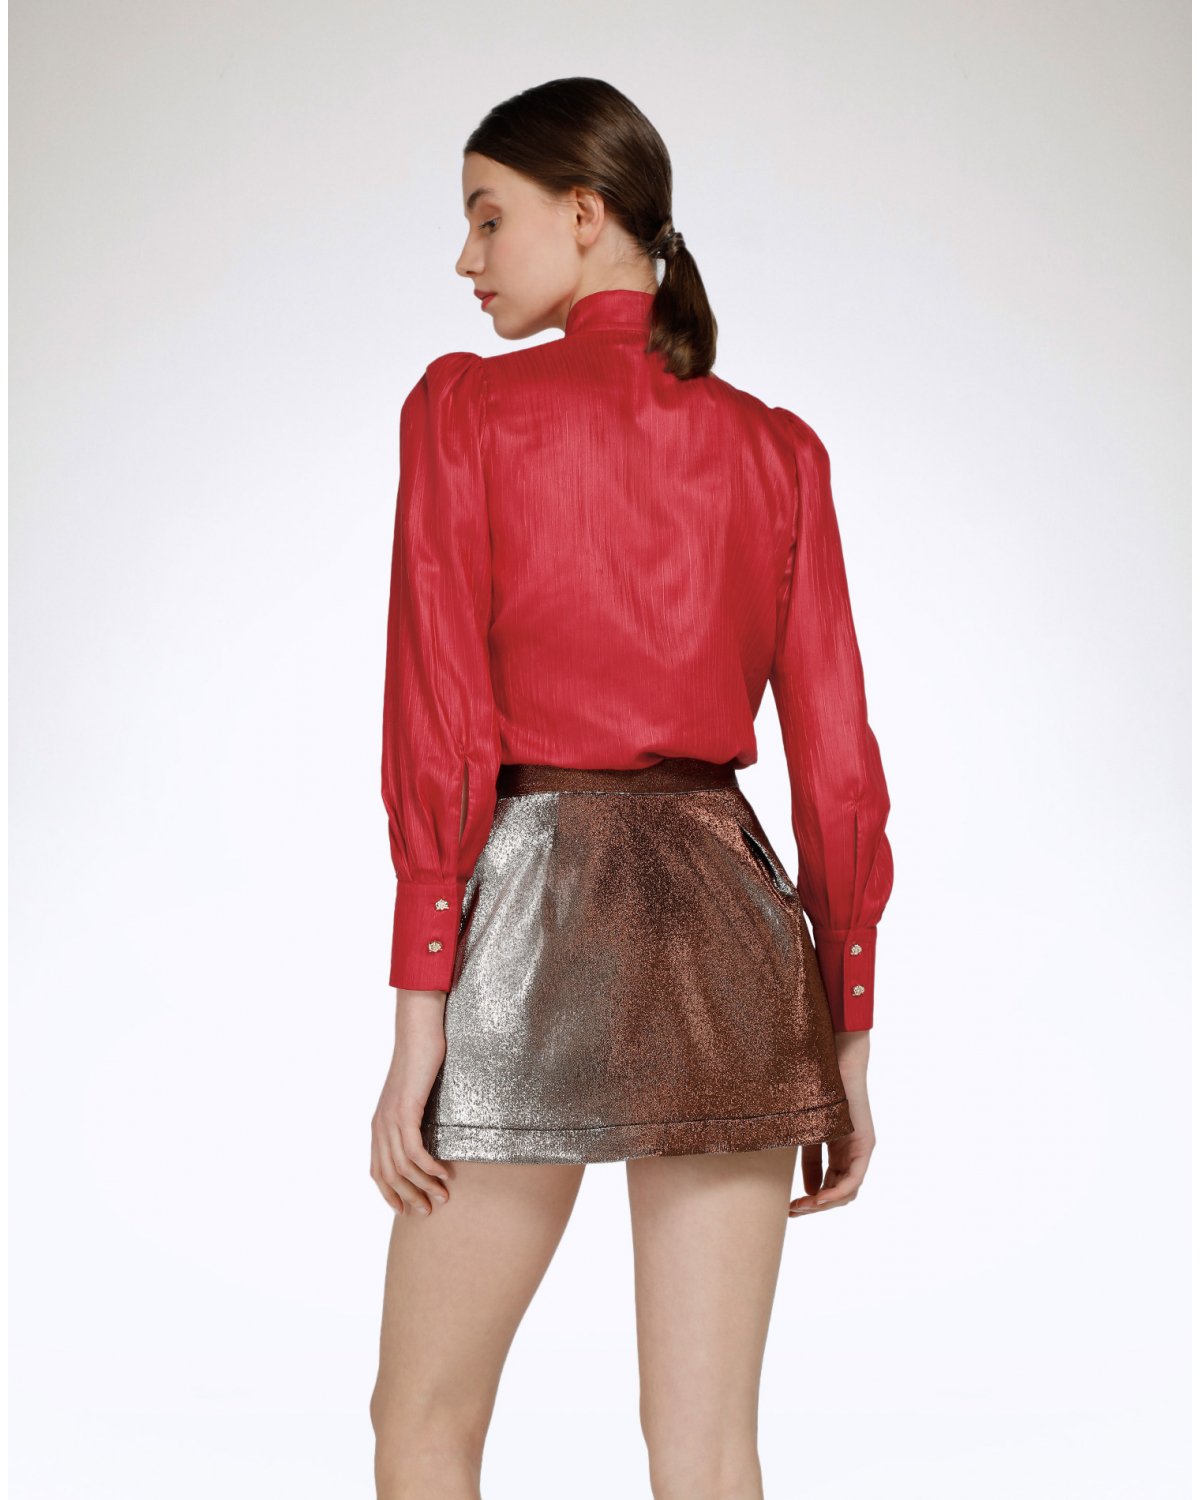 Red crinkled shirt with puffball sleeves | | Genny